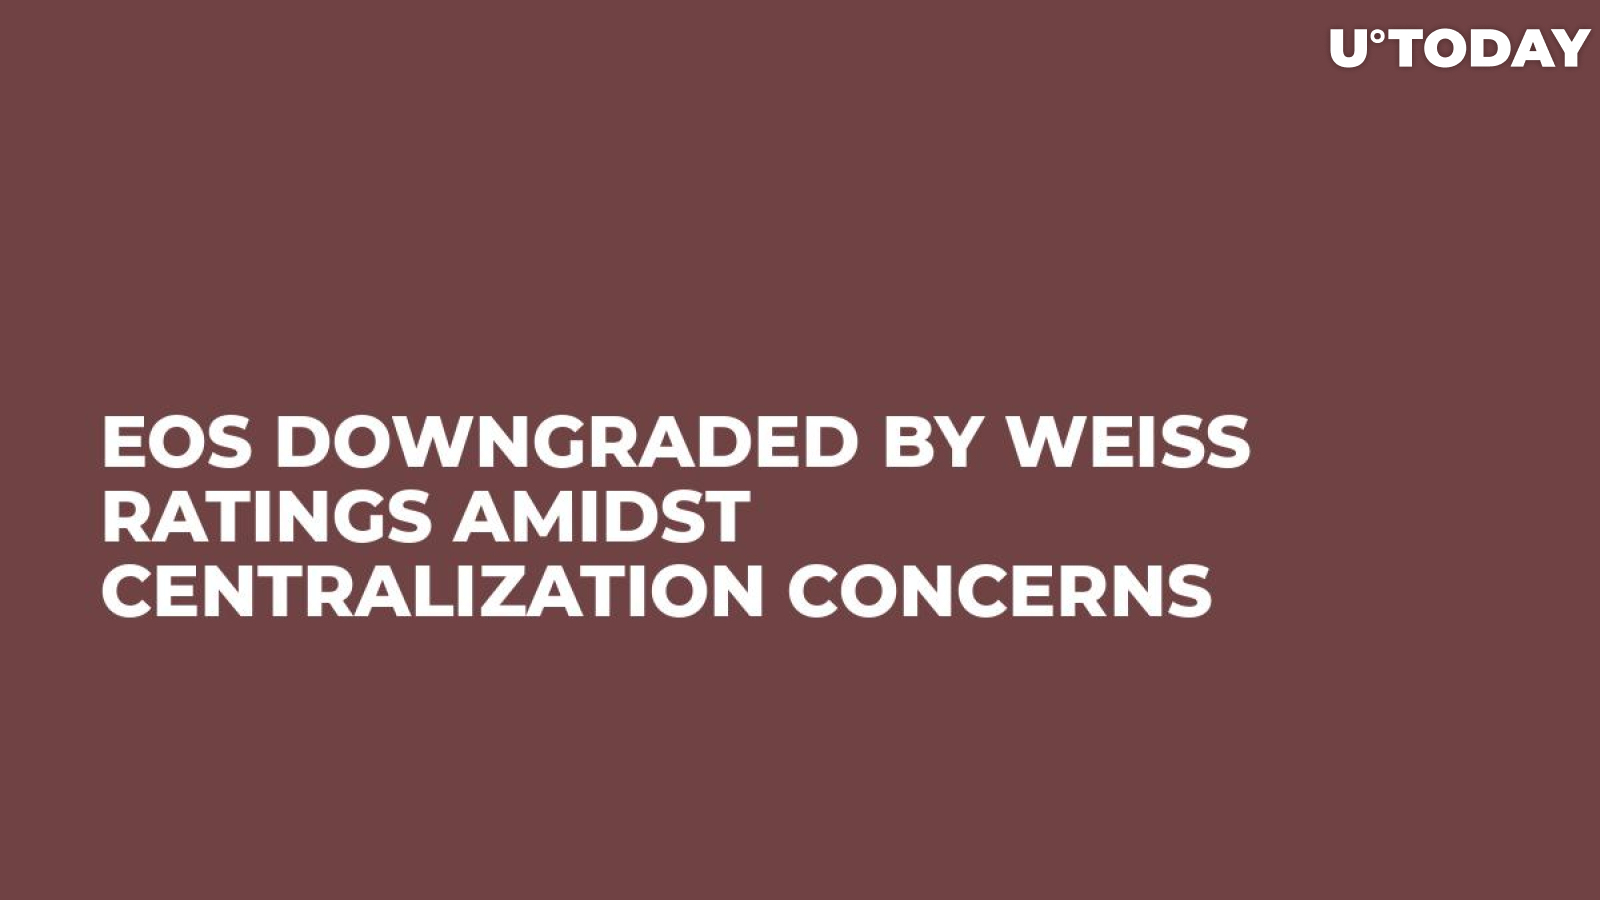 EOS Downgraded by Weiss Ratings Amidst Centralization Concerns